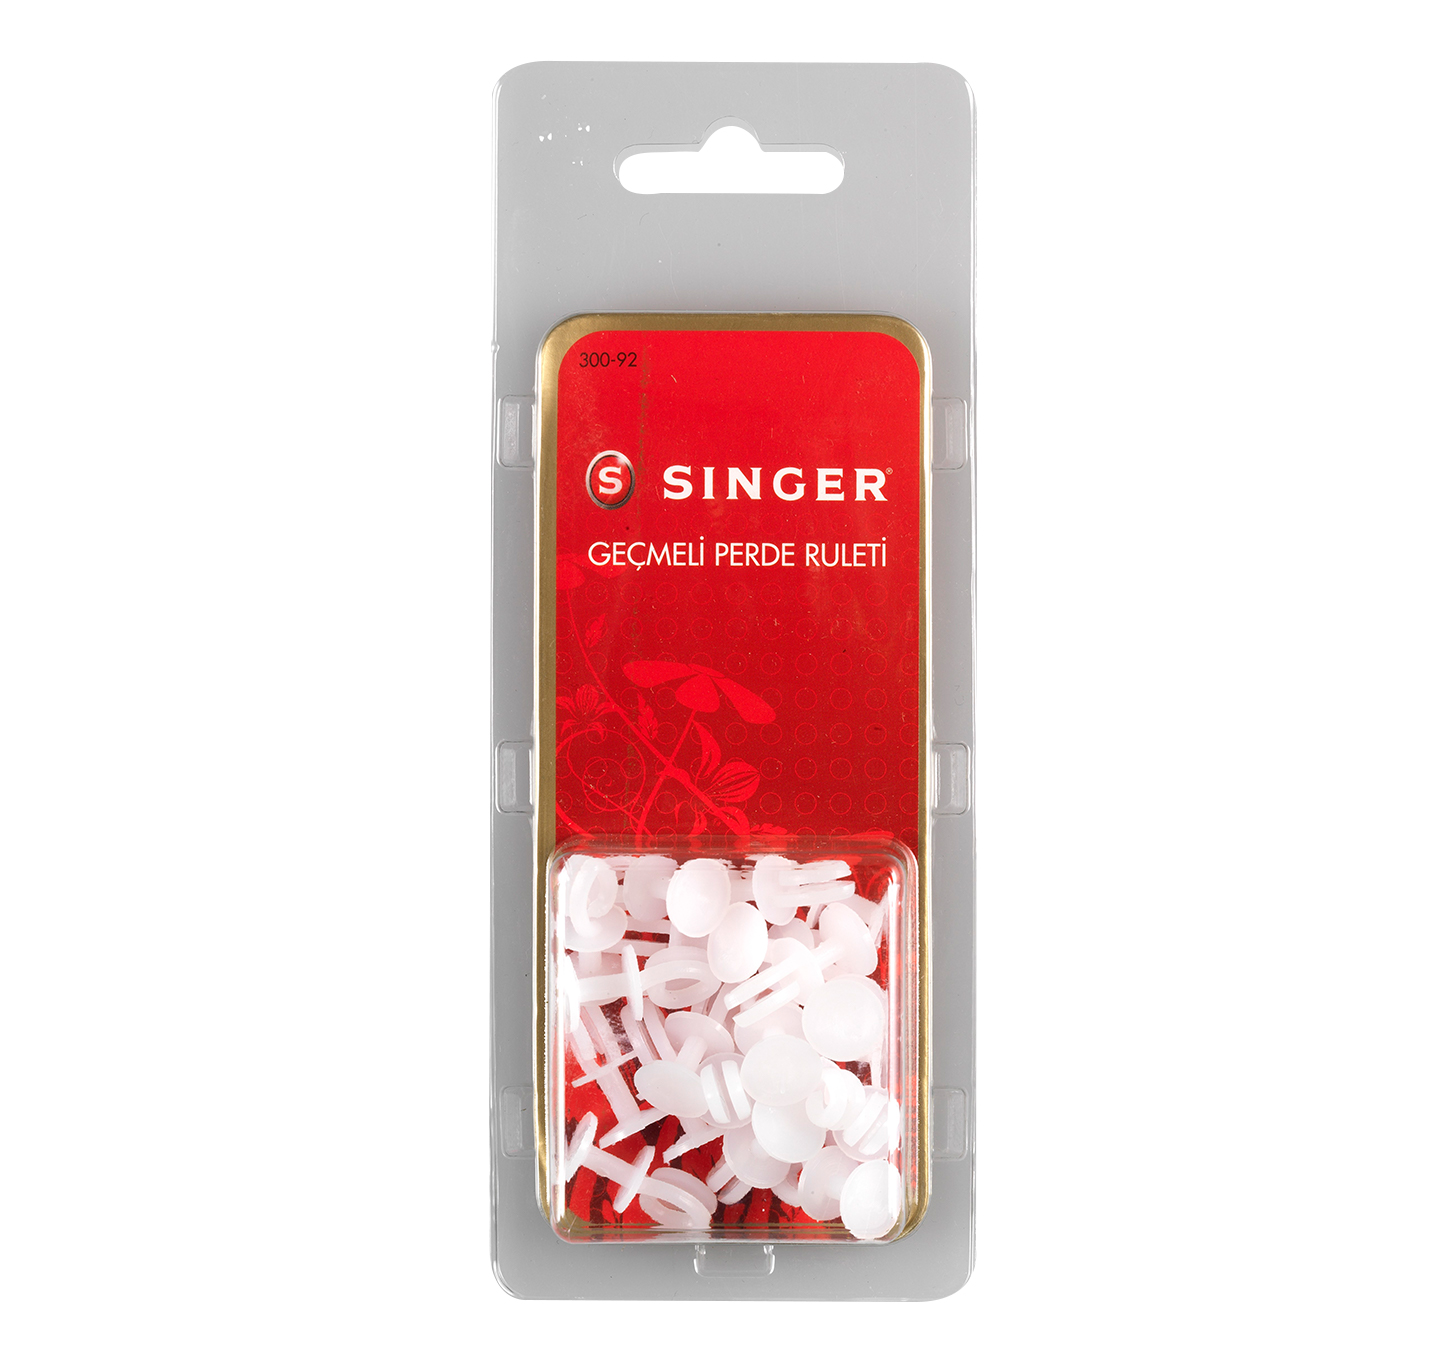 SINGER 300-92 CURTAIN ROULETTE HOOKED